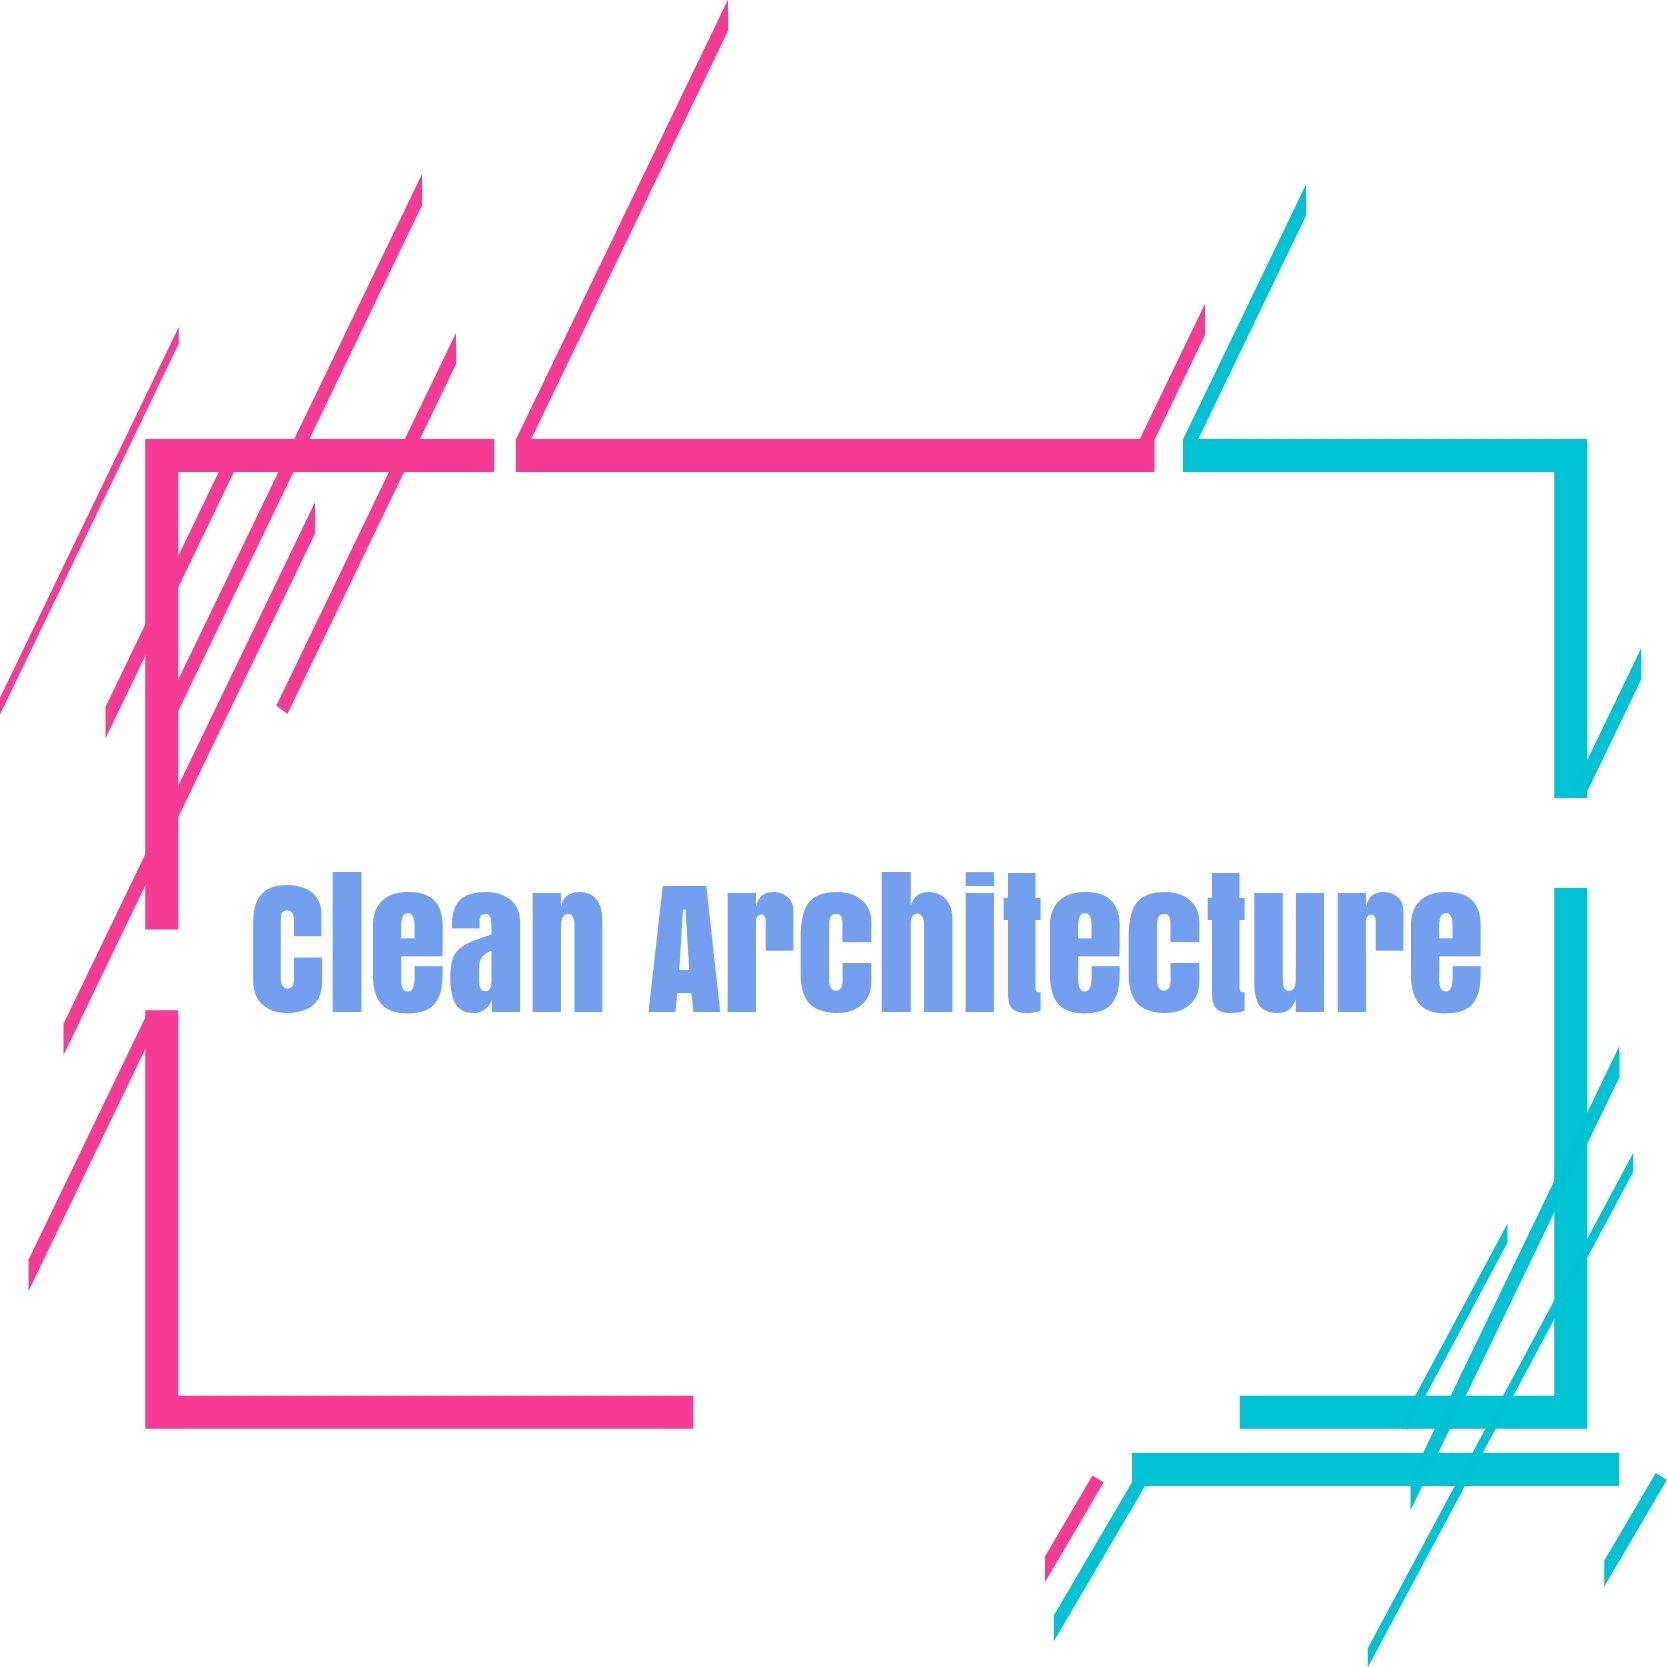 Implementing Clean Architecture